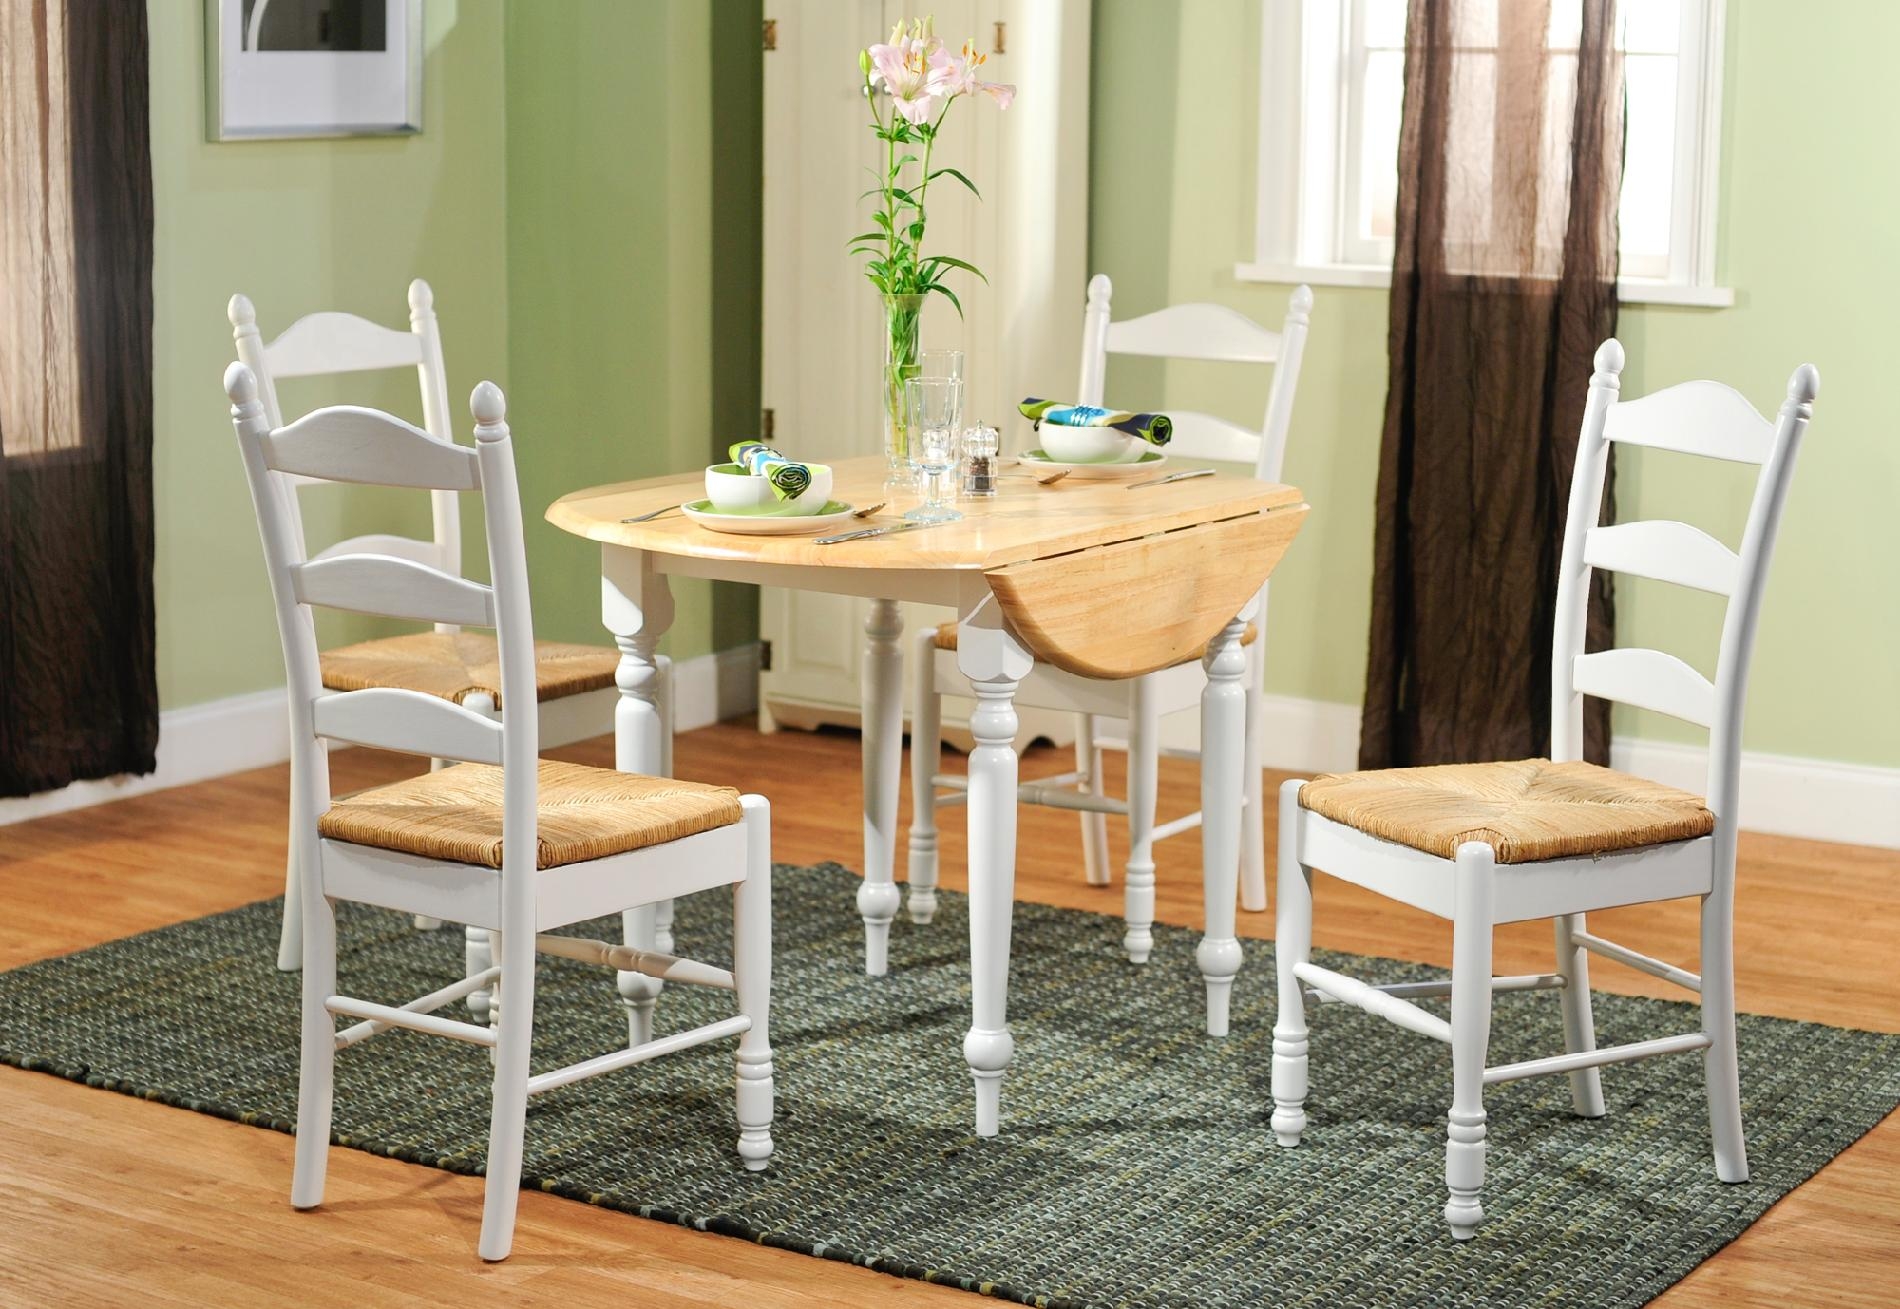 5 Piece Ladderback Kitchen Dining Room Set In White And Natural Pedestal Table And Four Ladder-Back Style Chairs